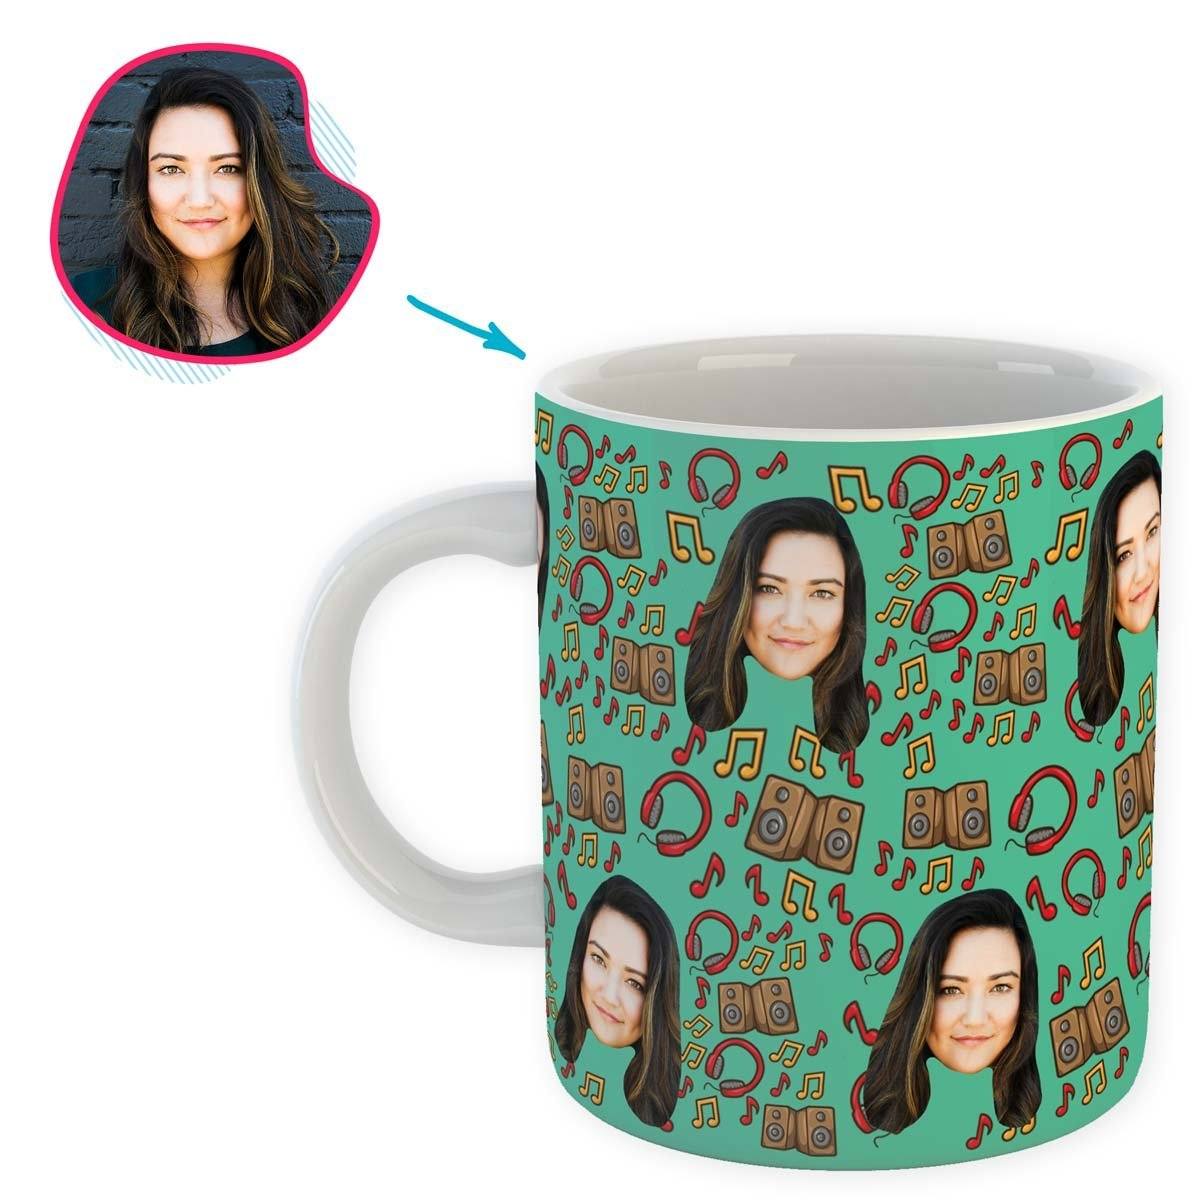 mint Music mug personalized with photo of face printed on it